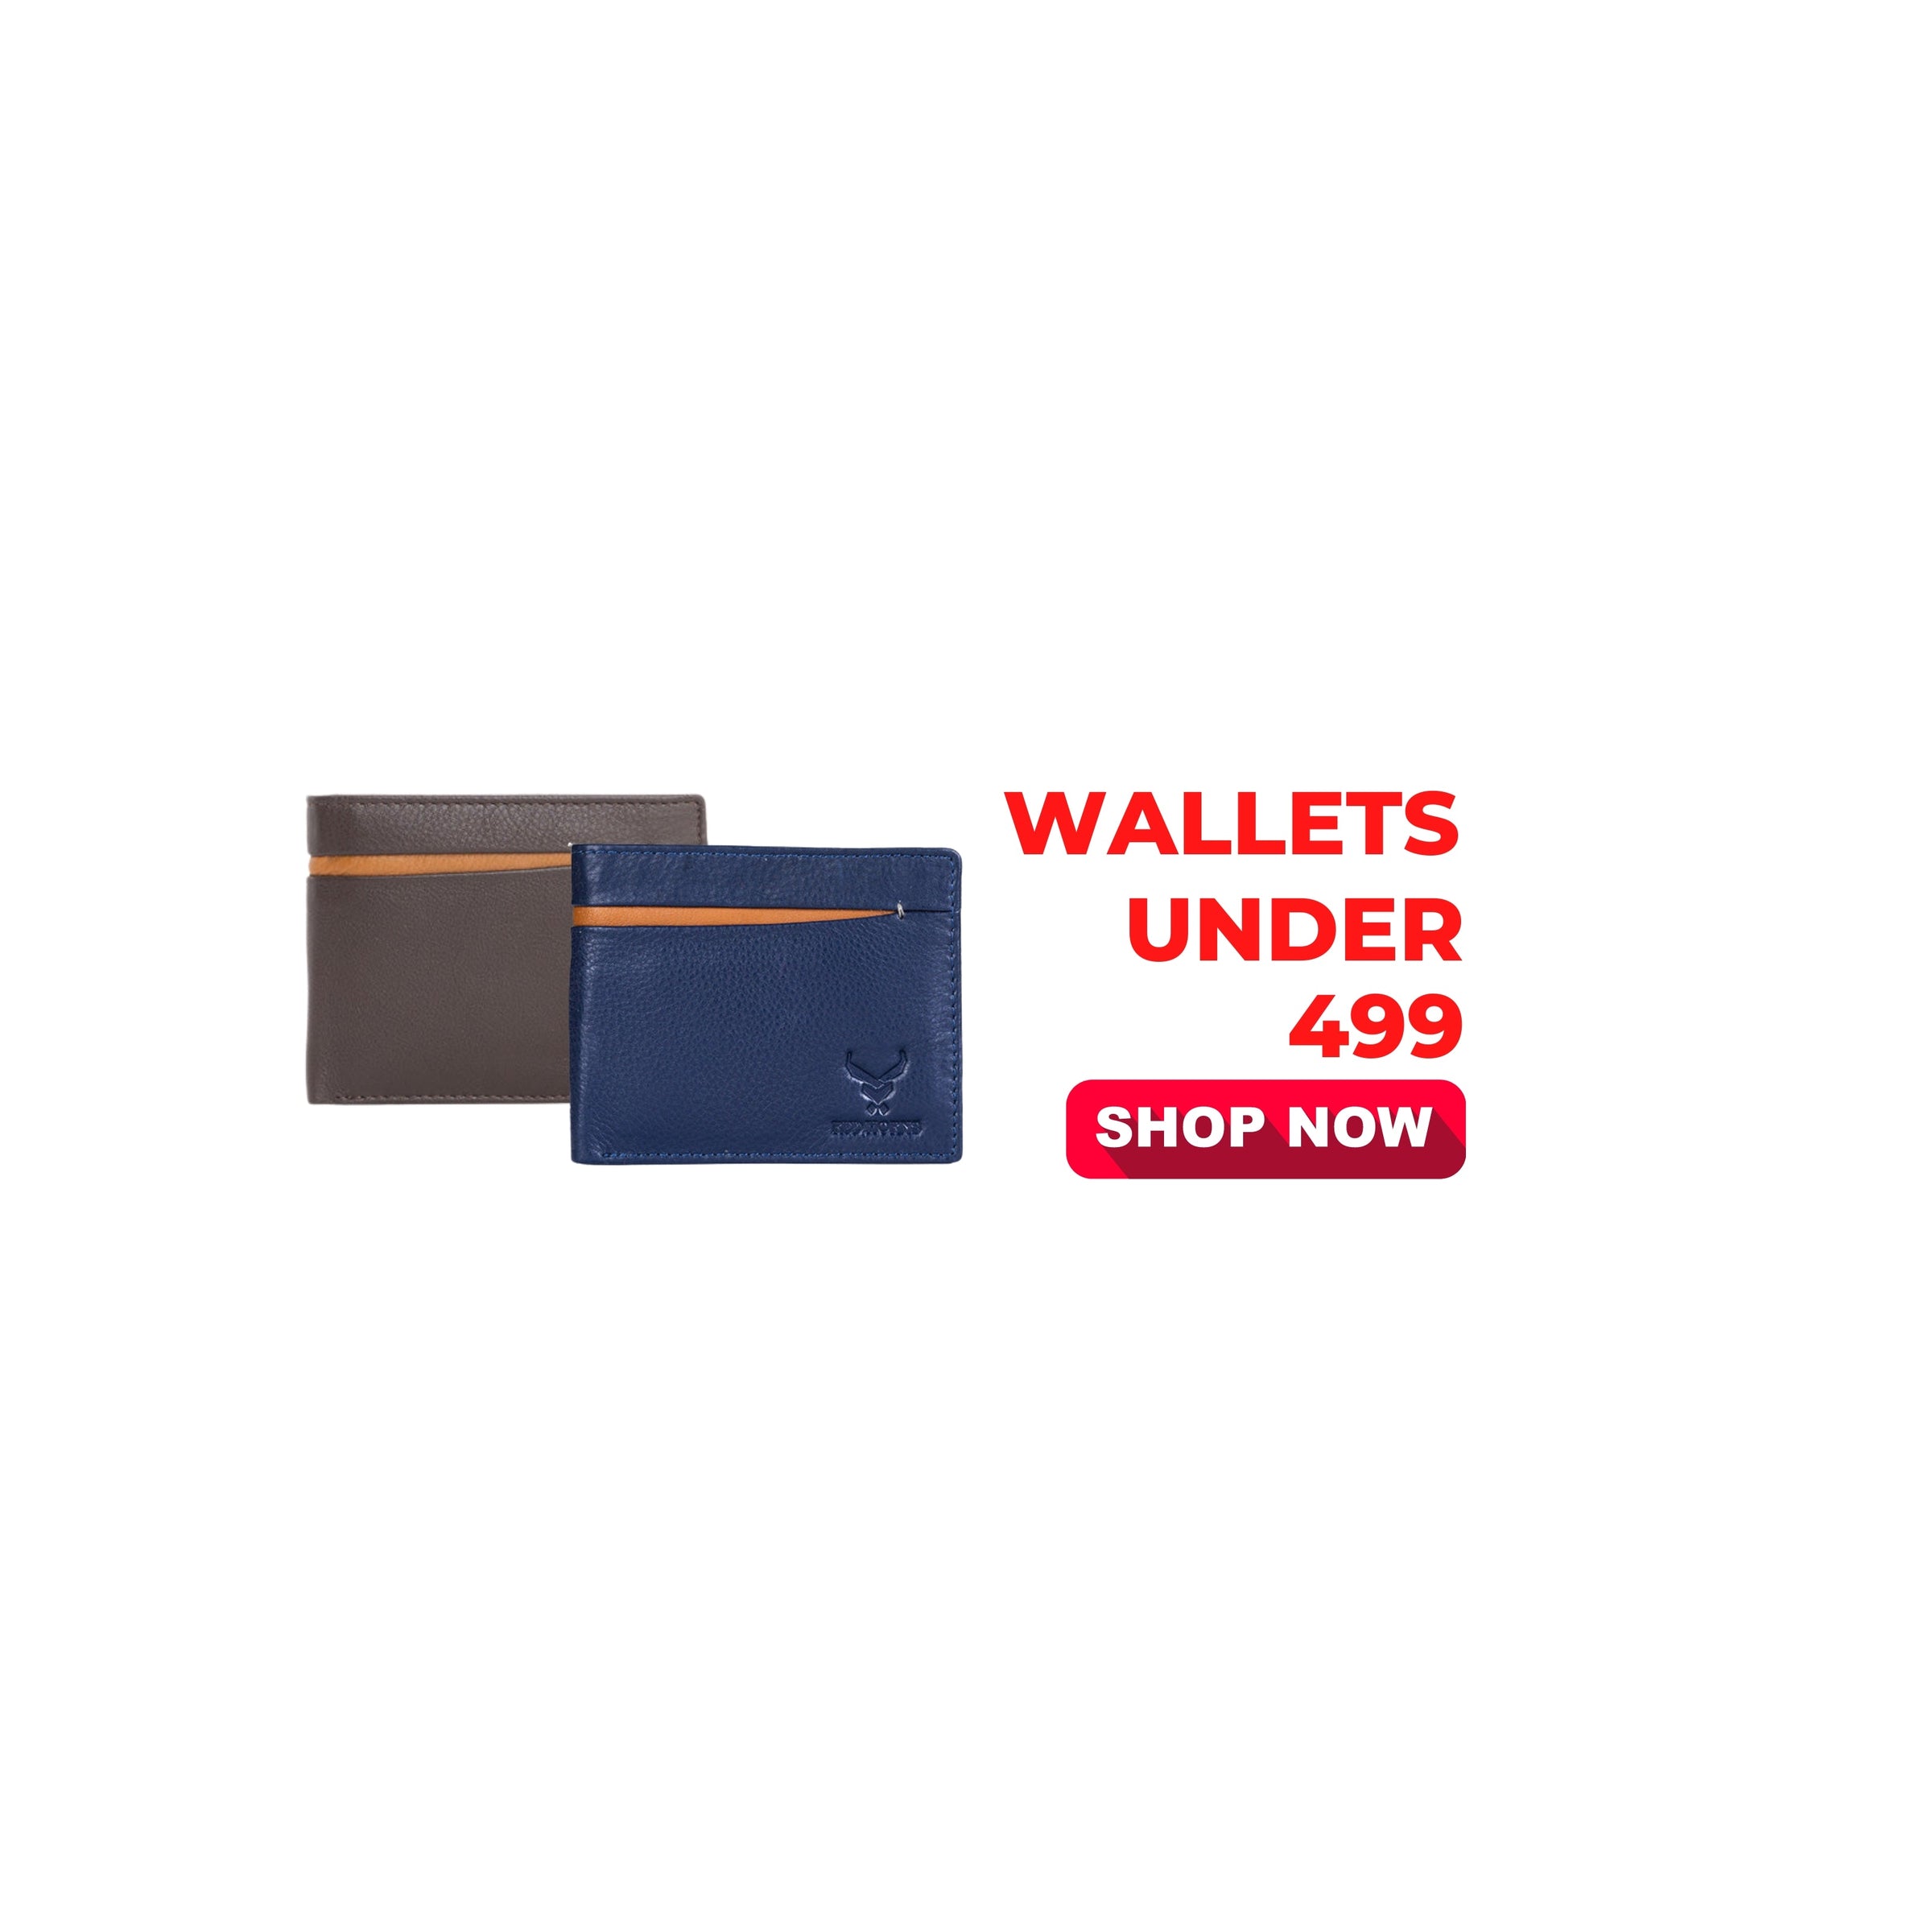 Leather Wallets Under 499